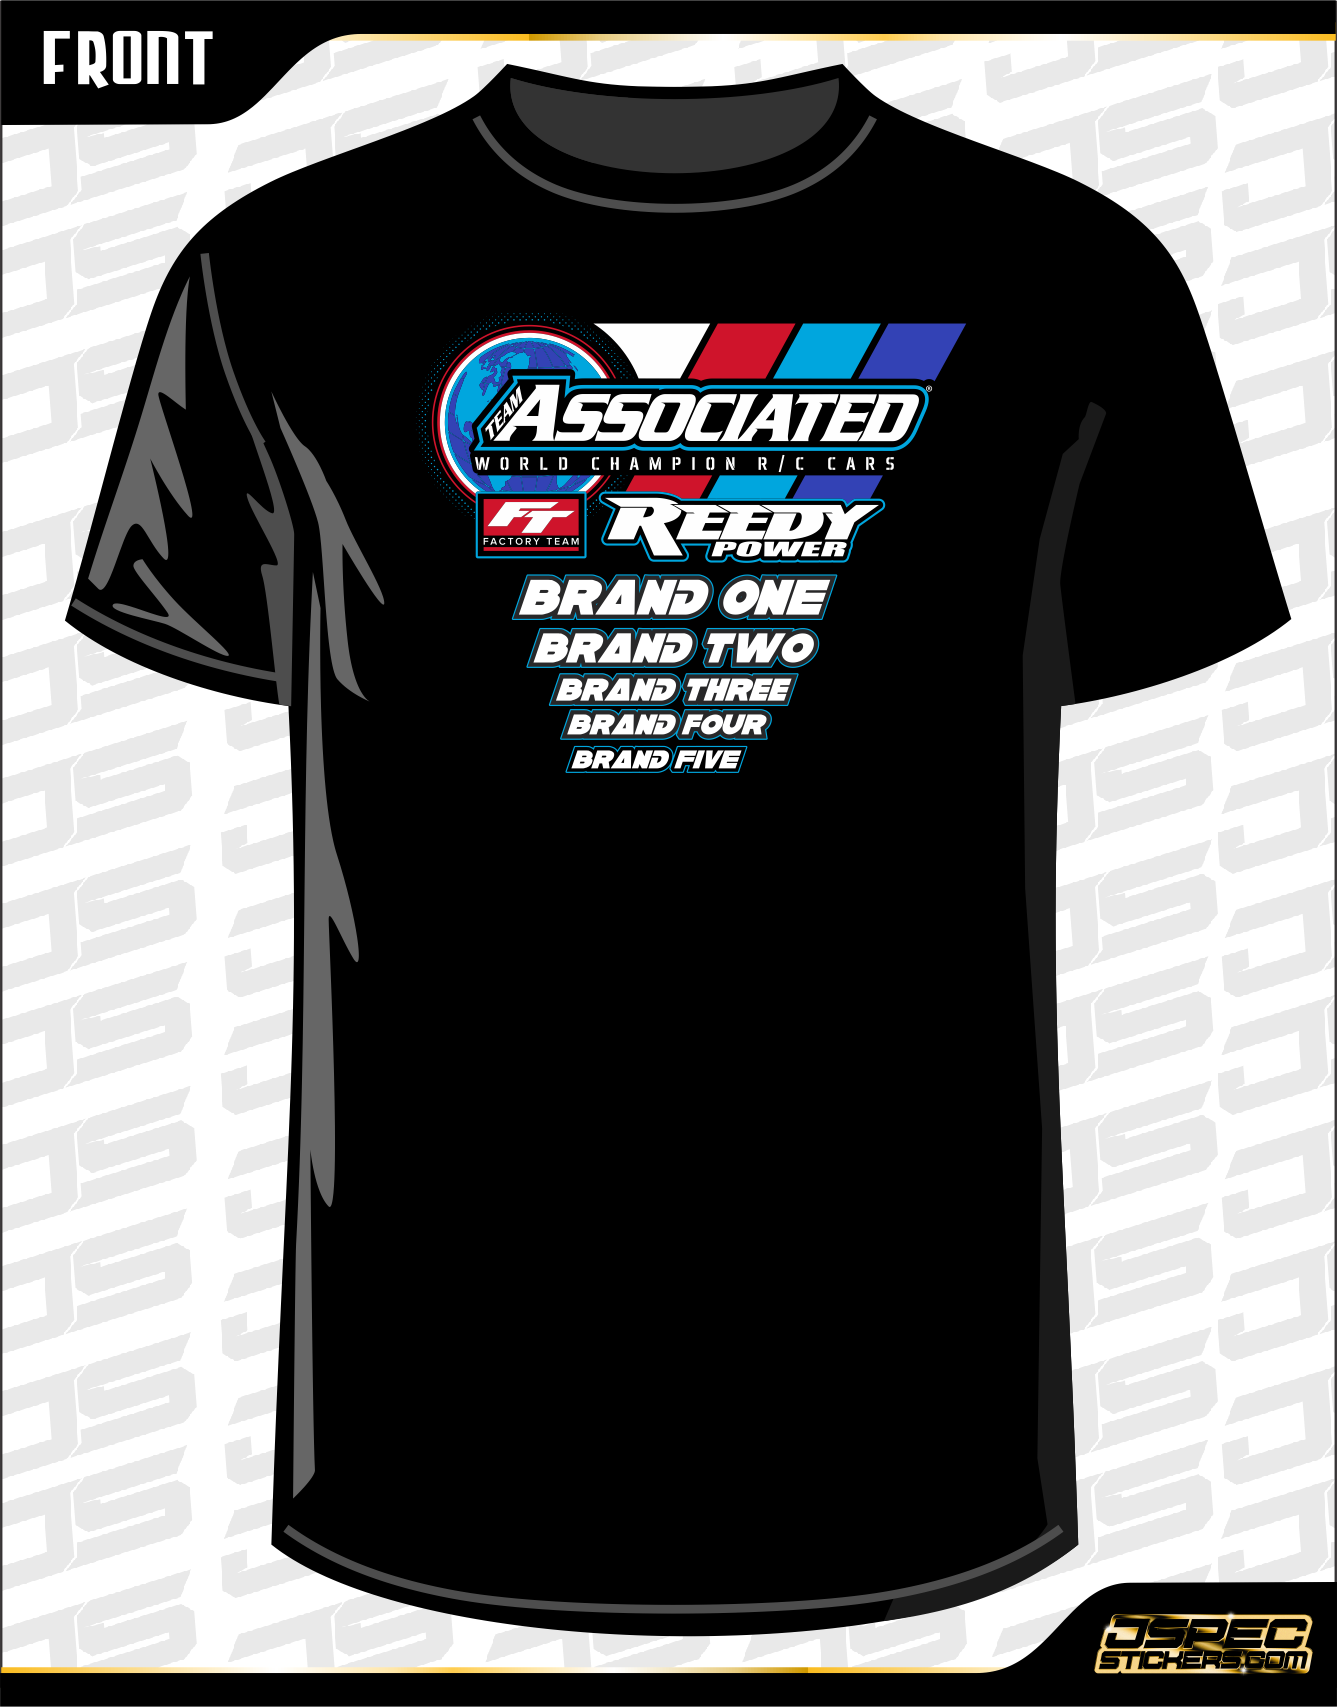 TEAM ASSOCIATED FT 2023 SHIRT with Sponsors